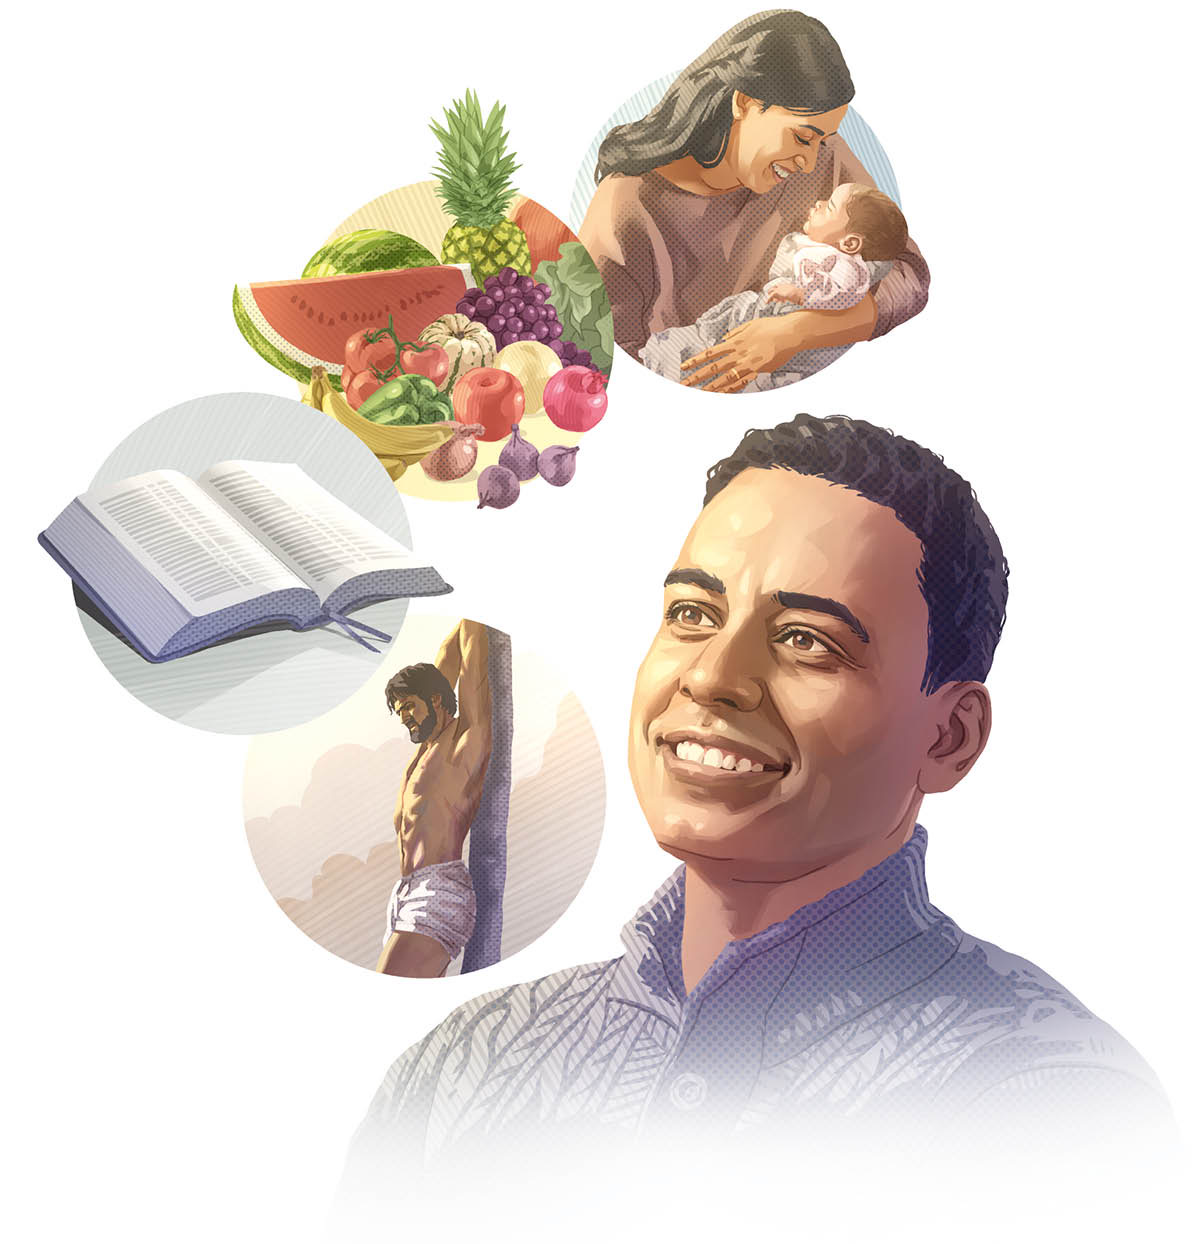 Collage: A man thinking about what God has given him. 1. Love, illustrated by a mother’s love for her baby. 2. Enjoyable food, illustrated by a variety of fruits and vegetables. 3. The Bible. 4. Jesus Christ’s ransom sacrifice.